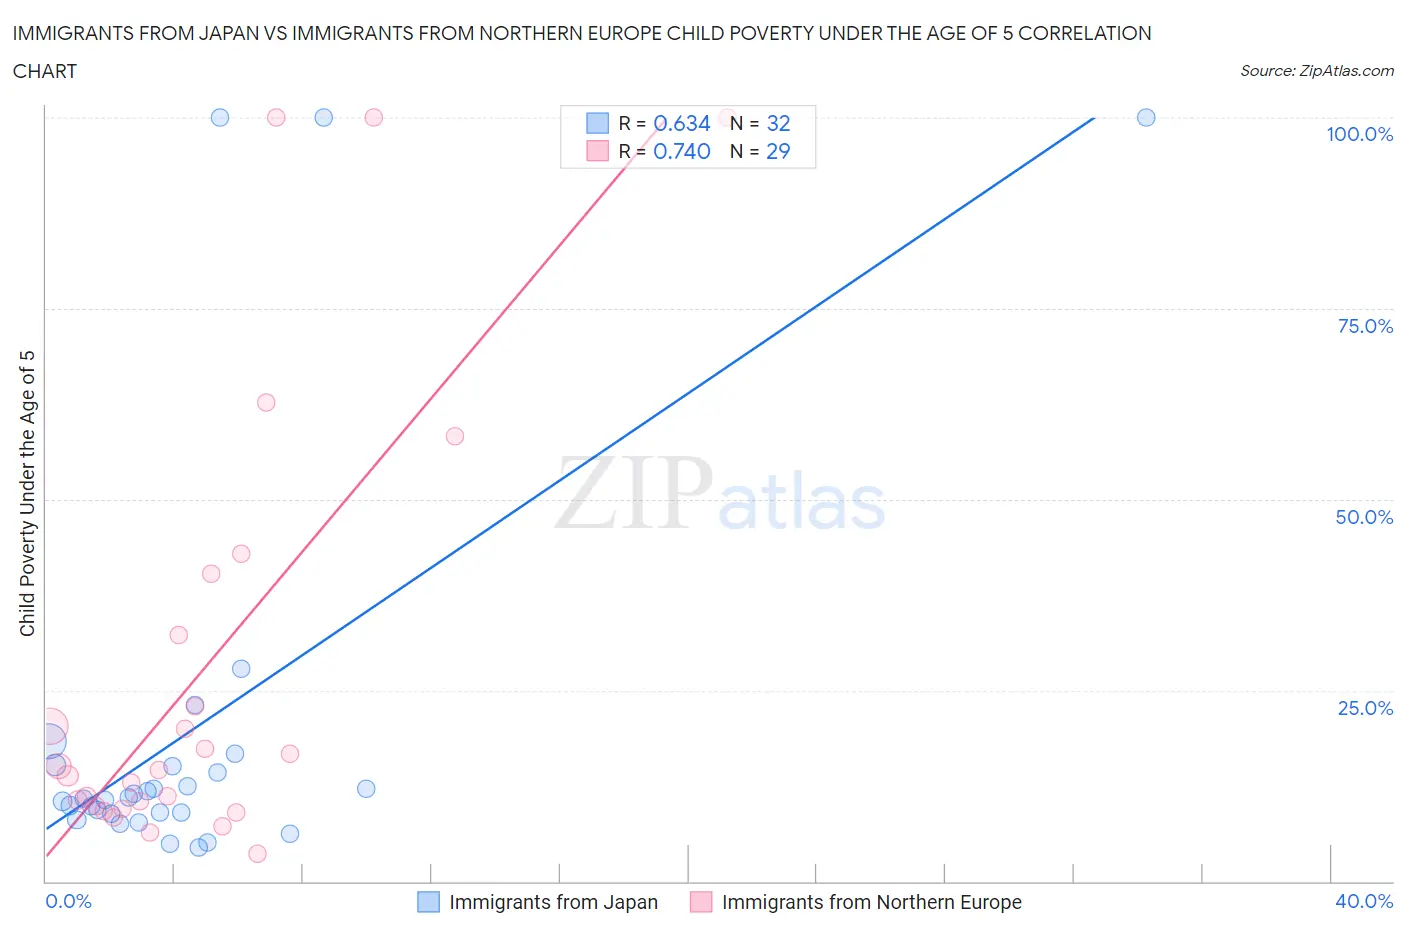 Immigrants from Japan vs Immigrants from Northern Europe Child Poverty Under the Age of 5